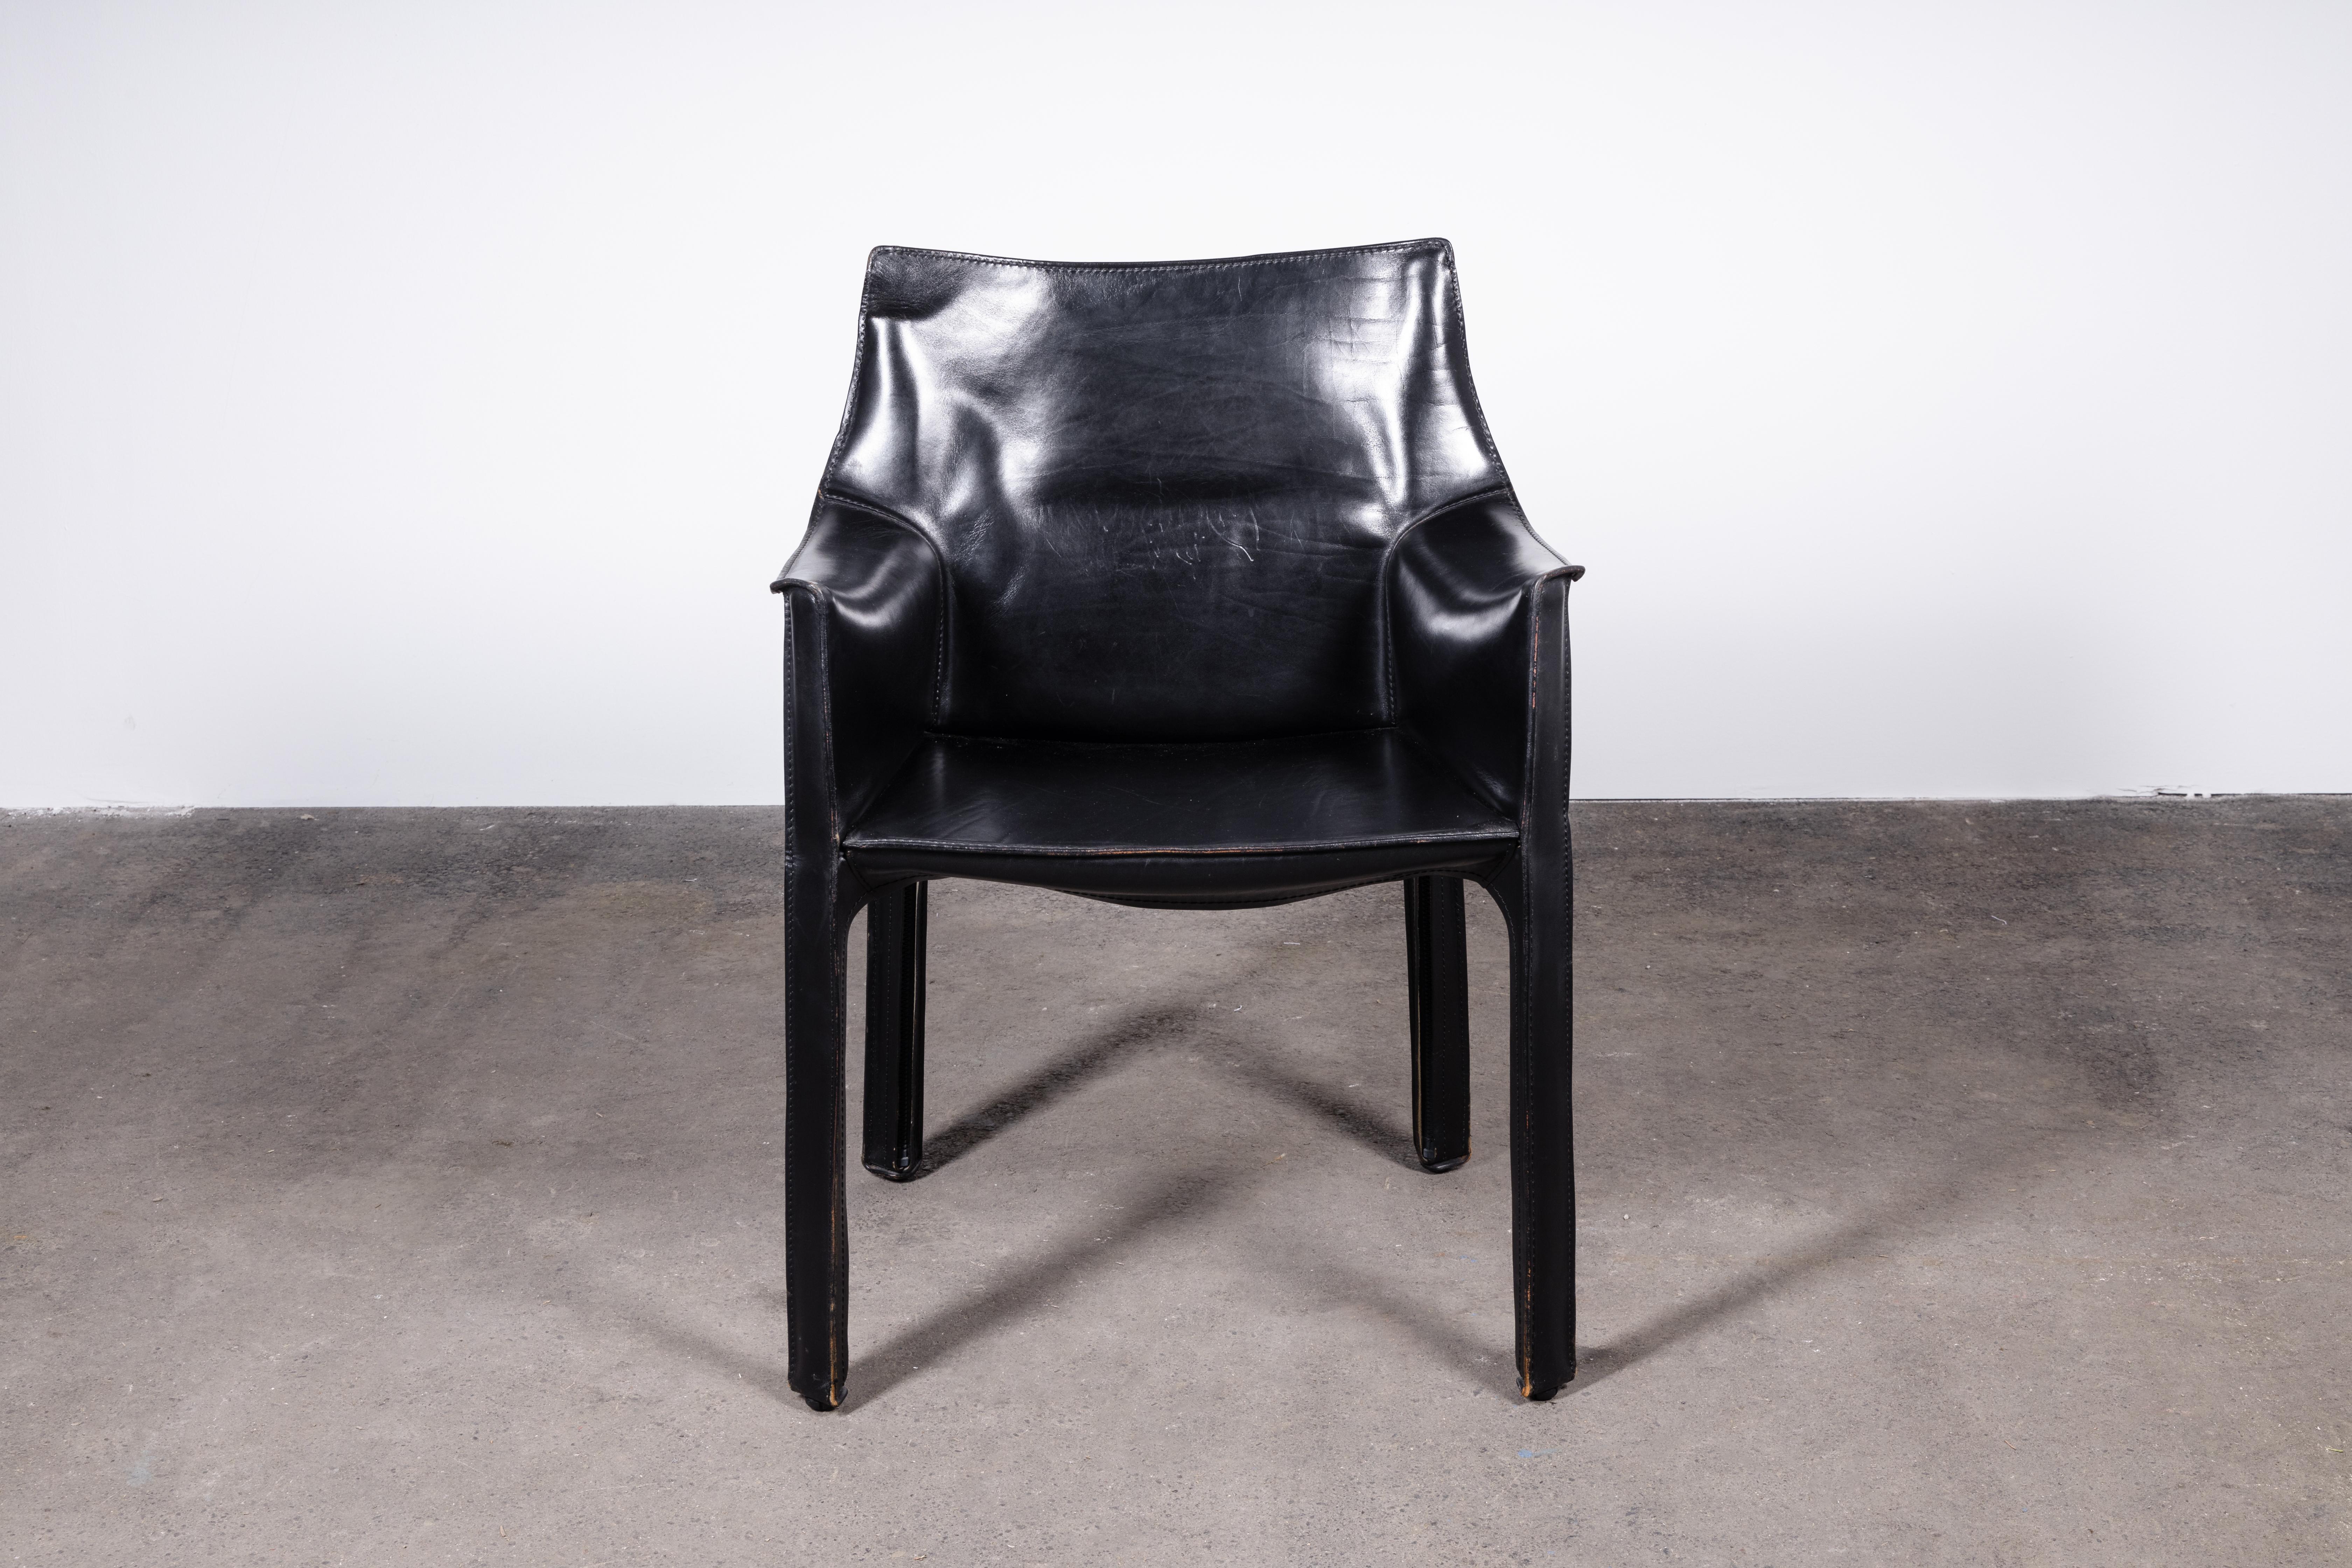 Set of 2 Mario Bellini 414 CAB armchairs. Made by Cassina in Italy in the 1980s. 

Flexible steel frame covered with a skin of high quality black saddle leather. This elegant, versatile chair is equally suitable for the dining room, study or